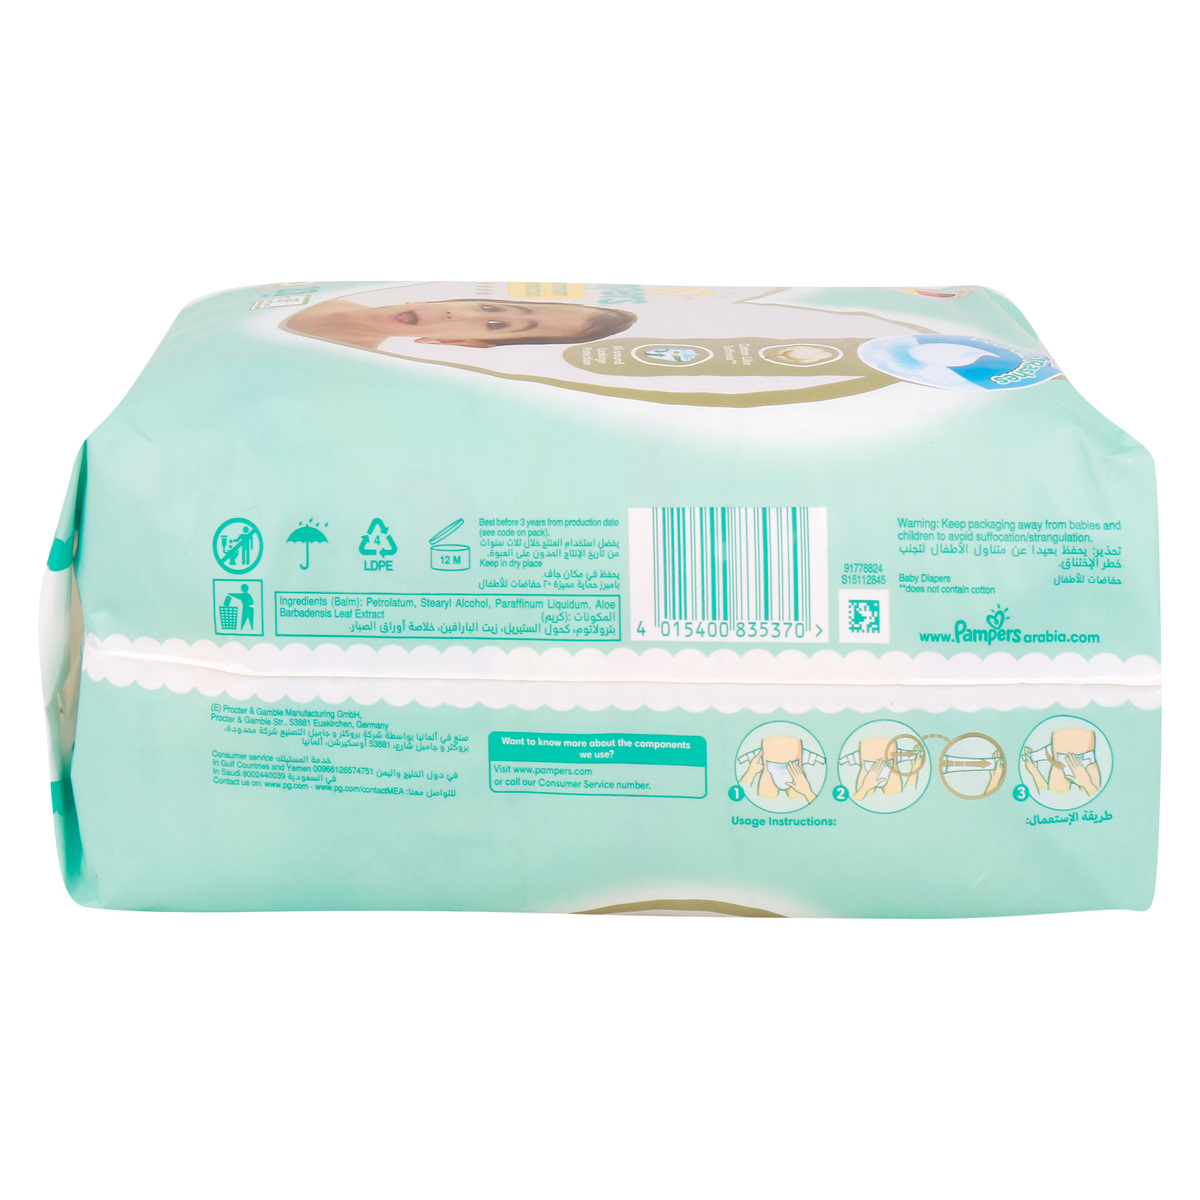 Pampers Premium Baby Diapers Size 5, 11-16kg 20pcs